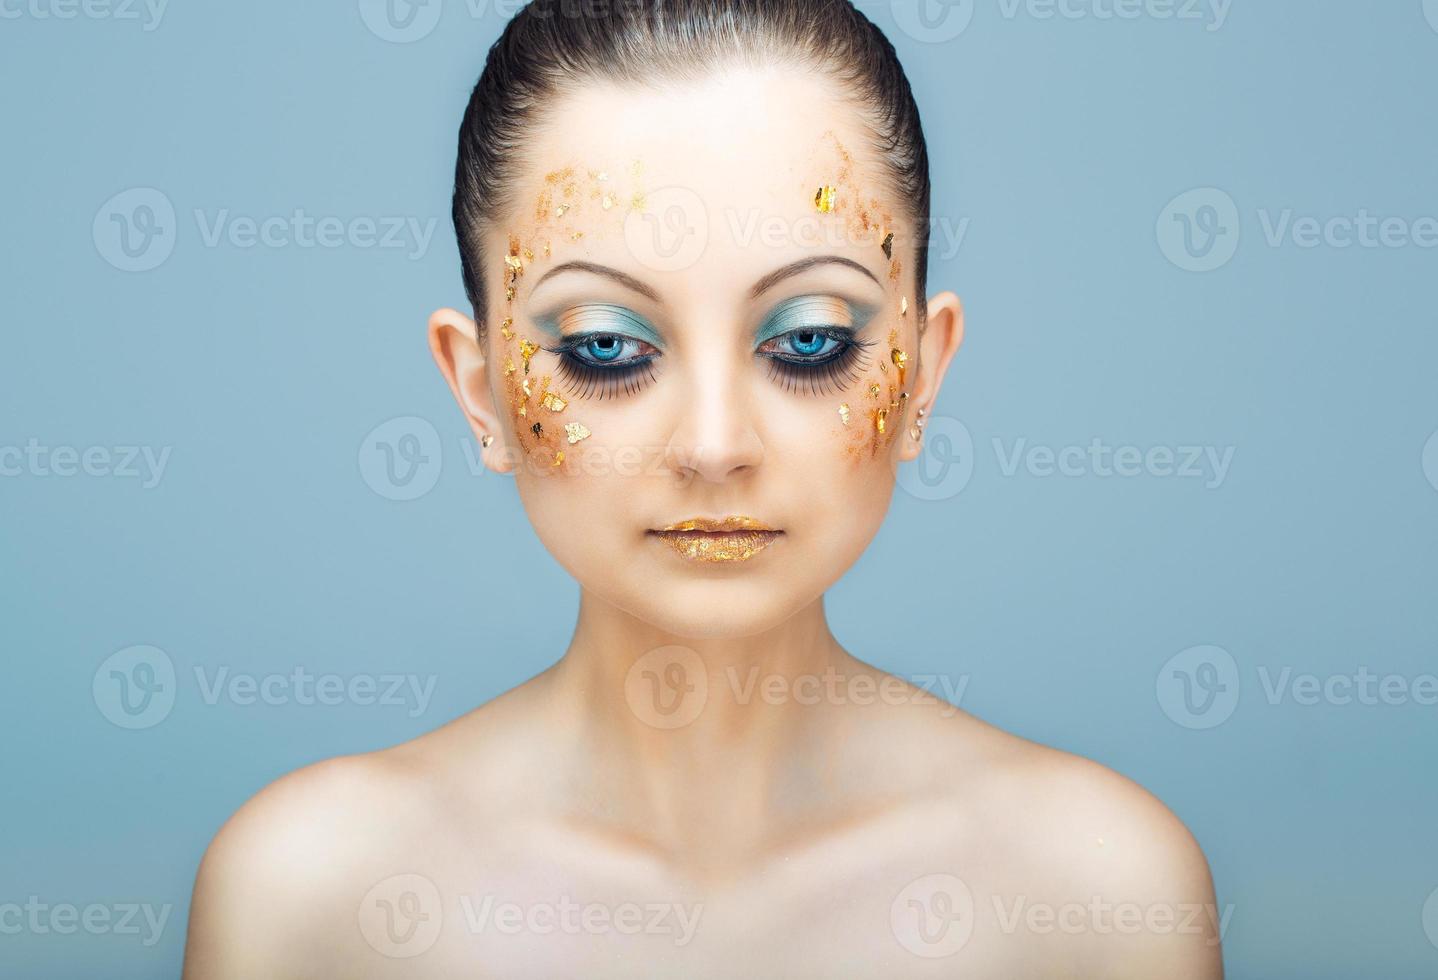 Glamorous portrait of young beautiful girl with big blue eyes, lush lashes and bright golden makeup photo